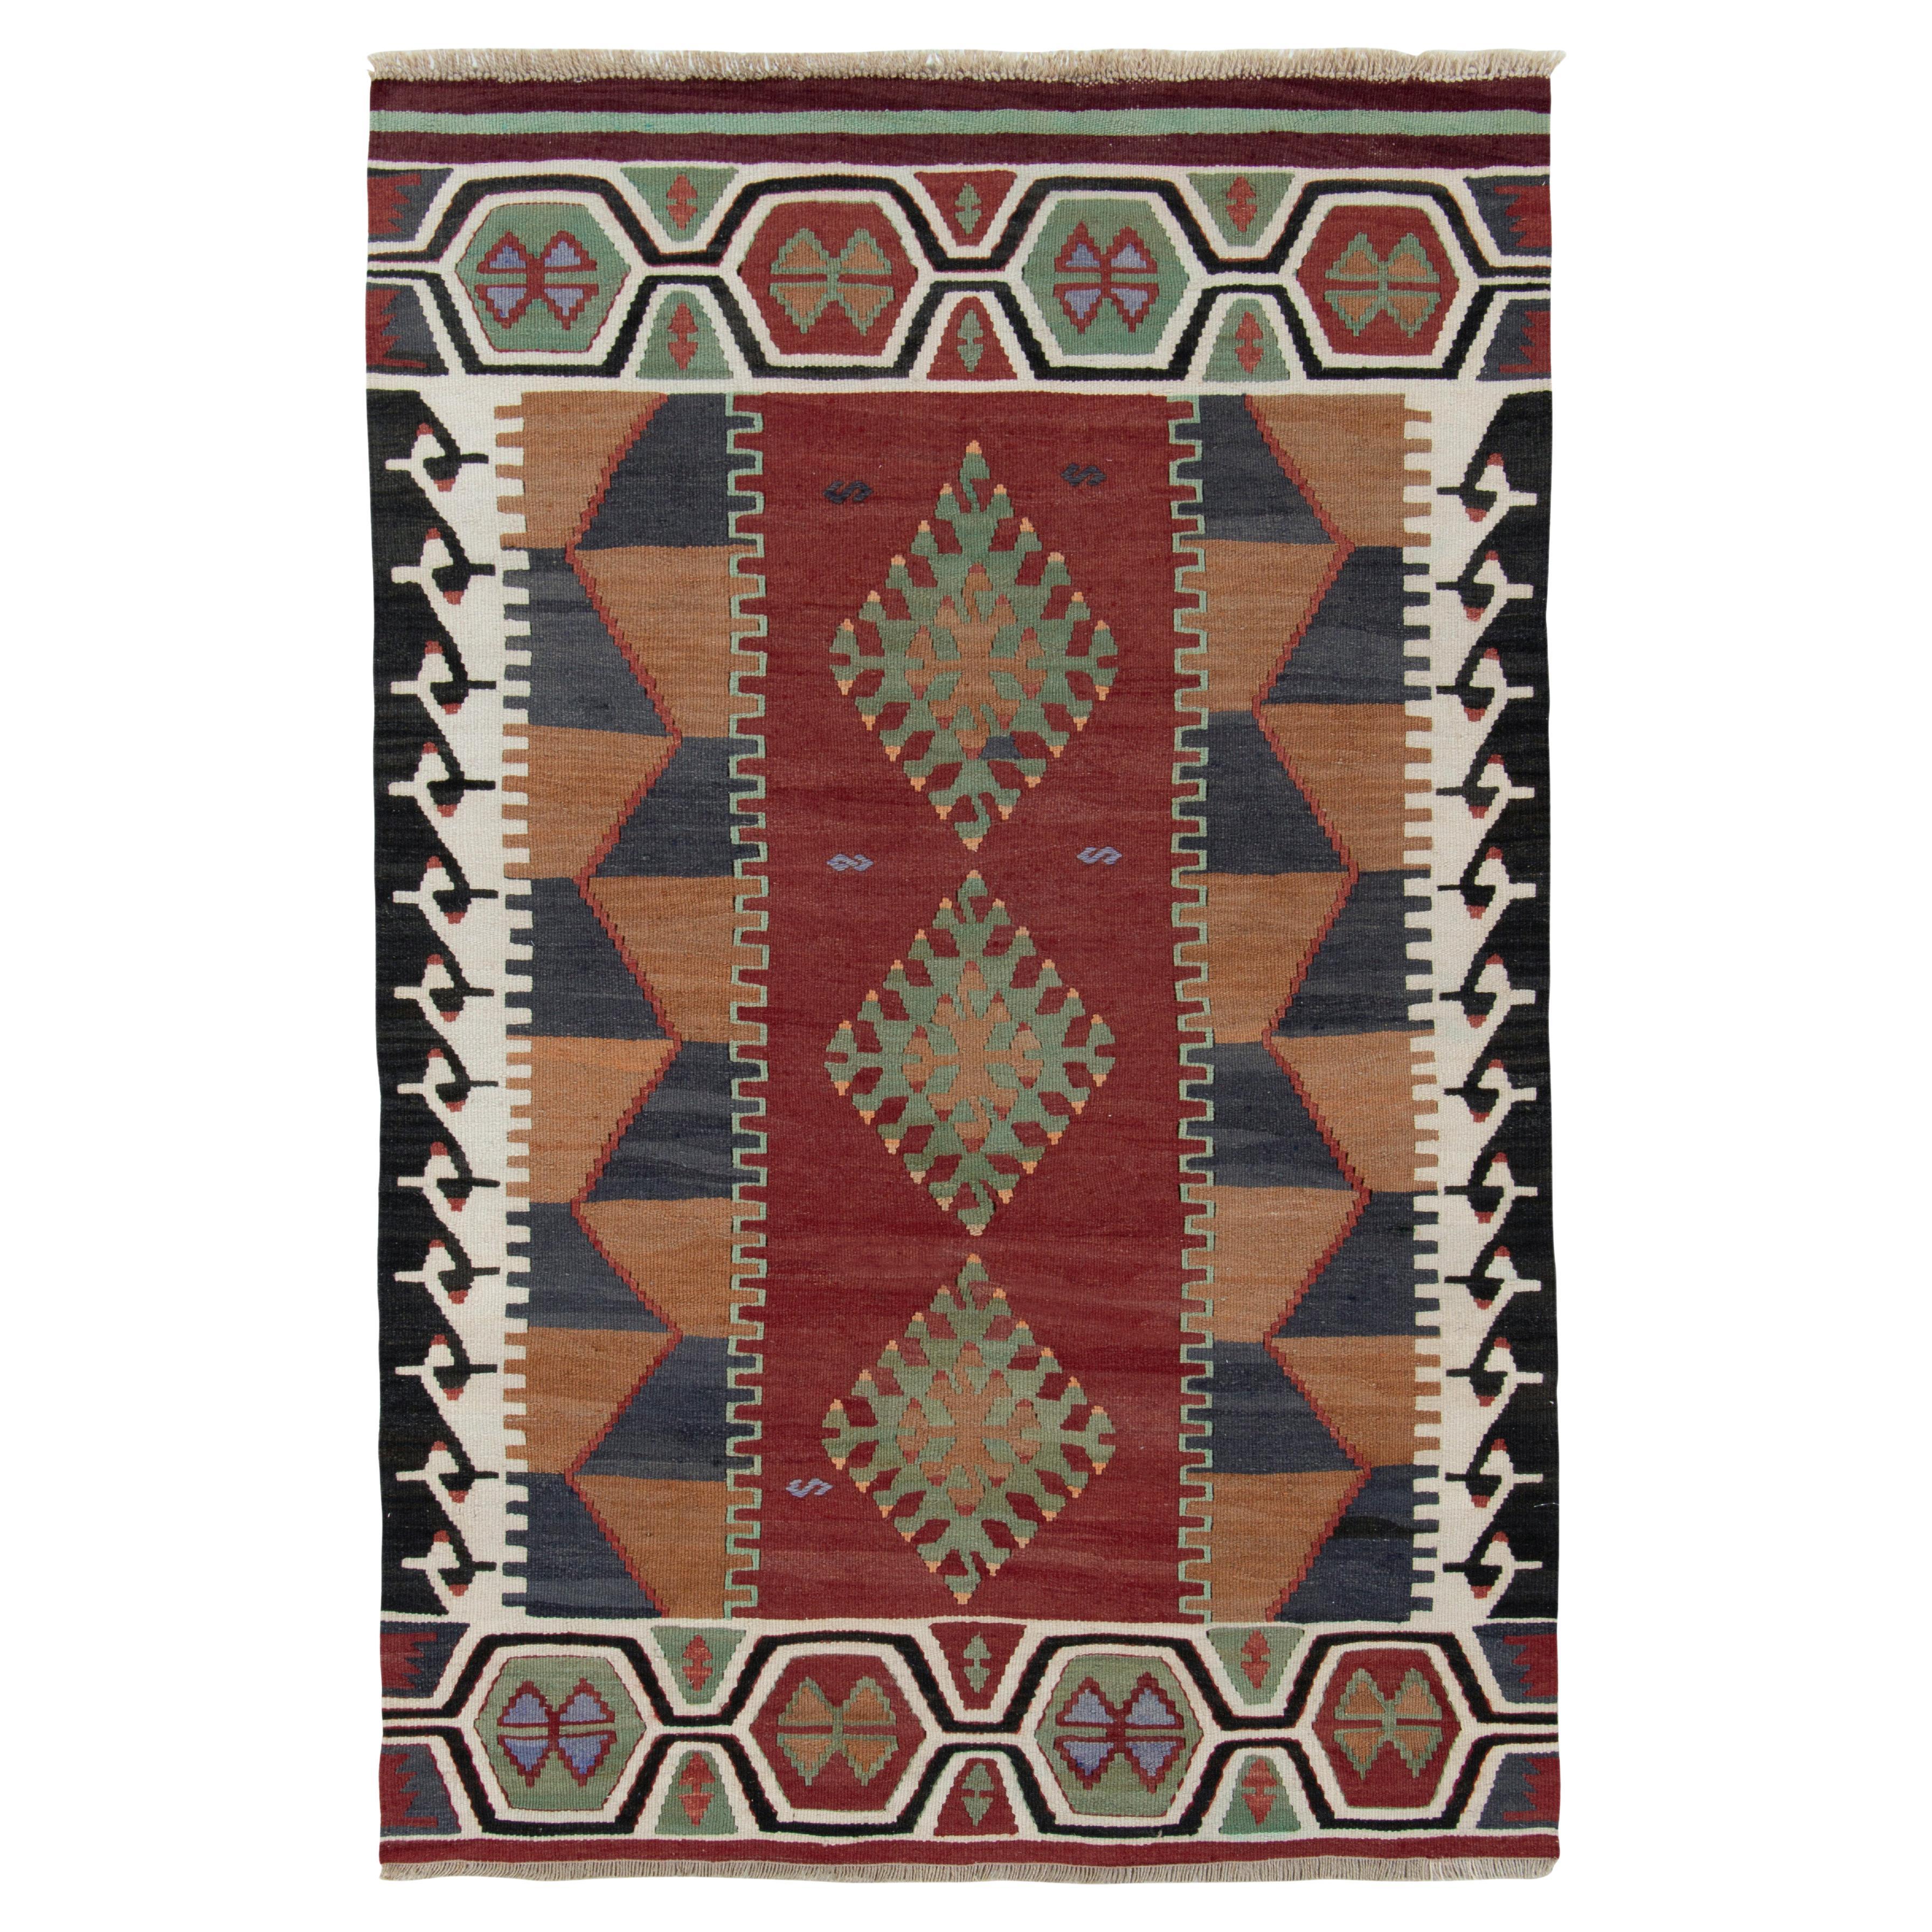 Handwoven Vintage Persian Kilim Rug in Red, Brown Medallions by Rug & Kilim For Sale